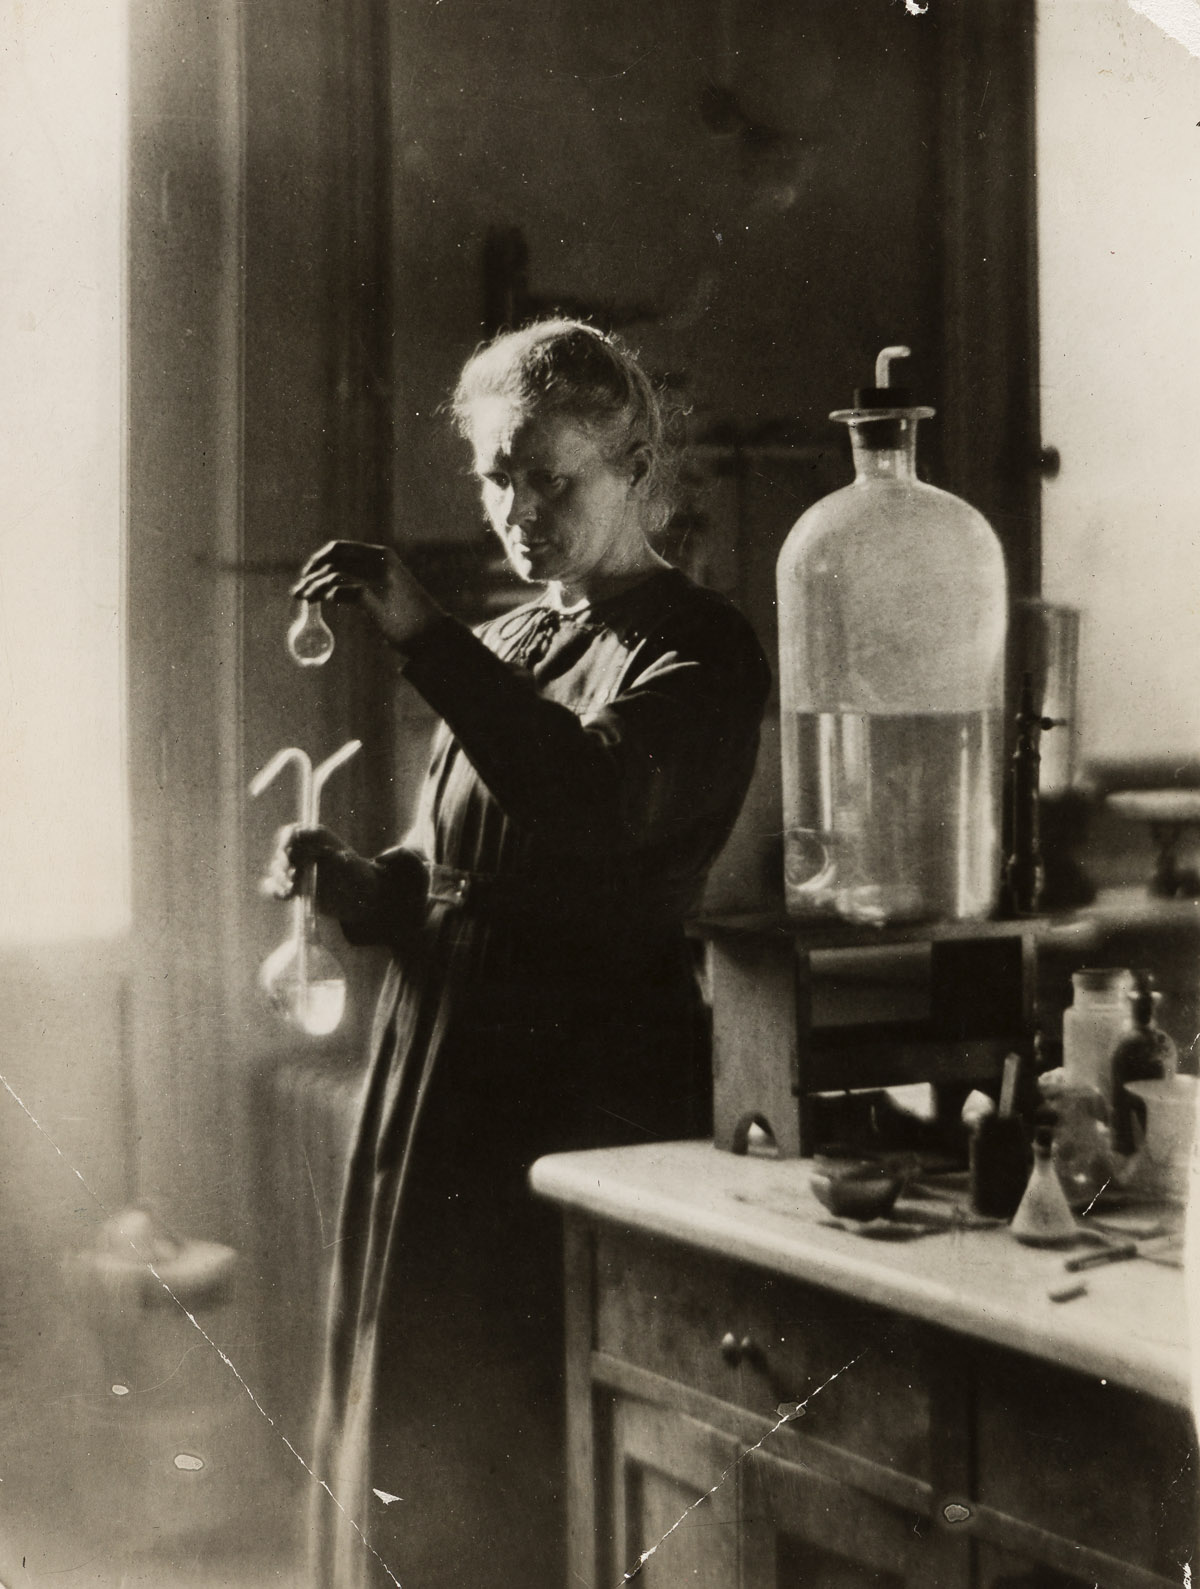 (MADAME CURIE--RADIUM) A group of 6 photographs depicting the Nobel Prize-winning chemist and physicist and her husband and daughter.